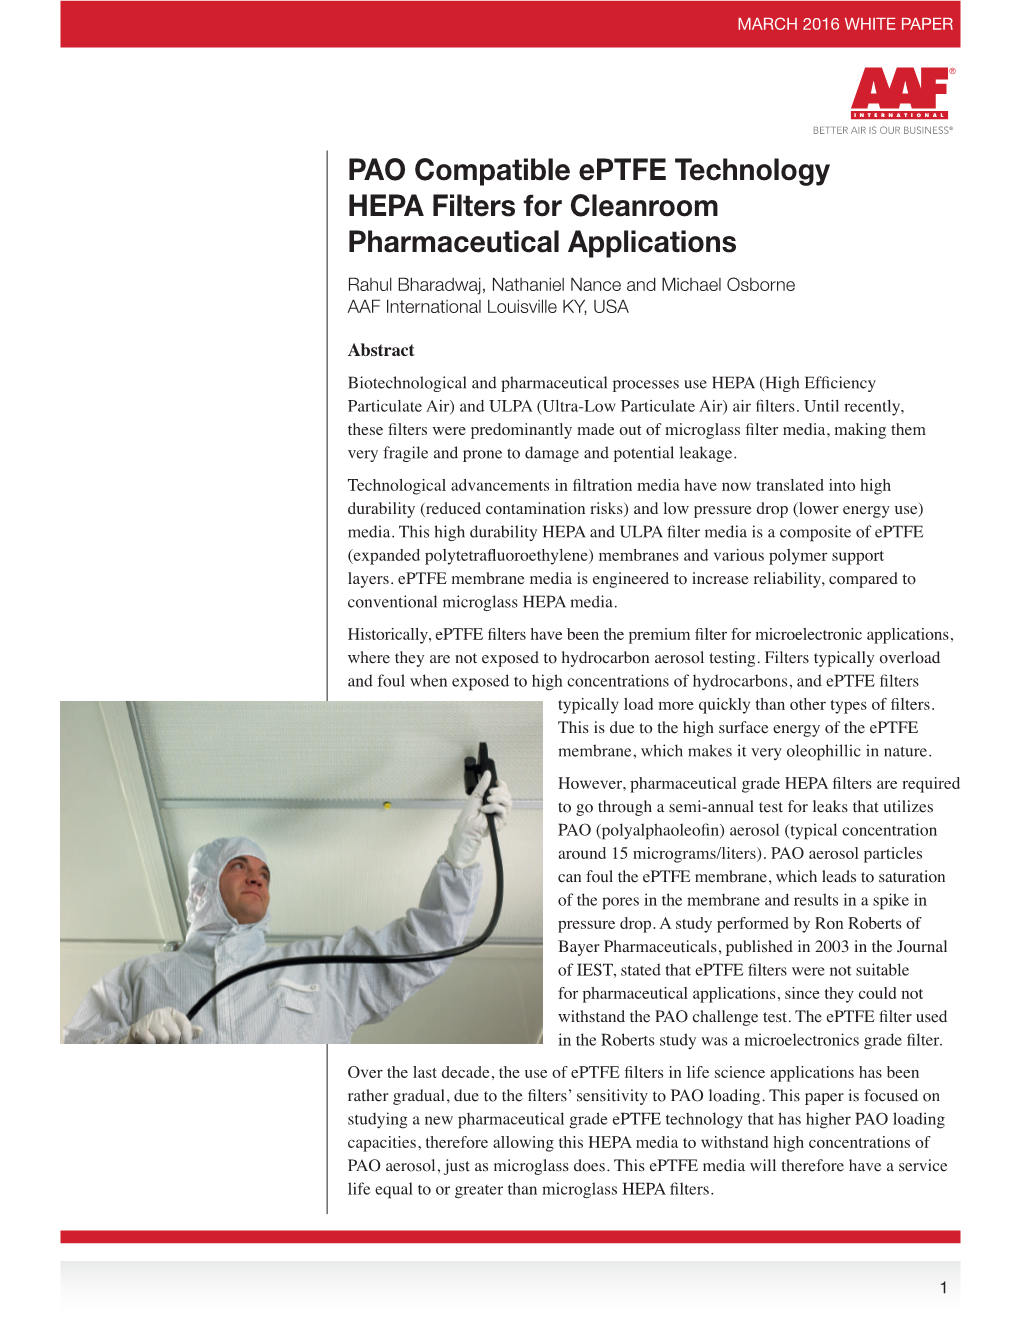 PAO Compatible Eptfe Technology HEPA Filters for Cleanroom Pharmaceutical Applications